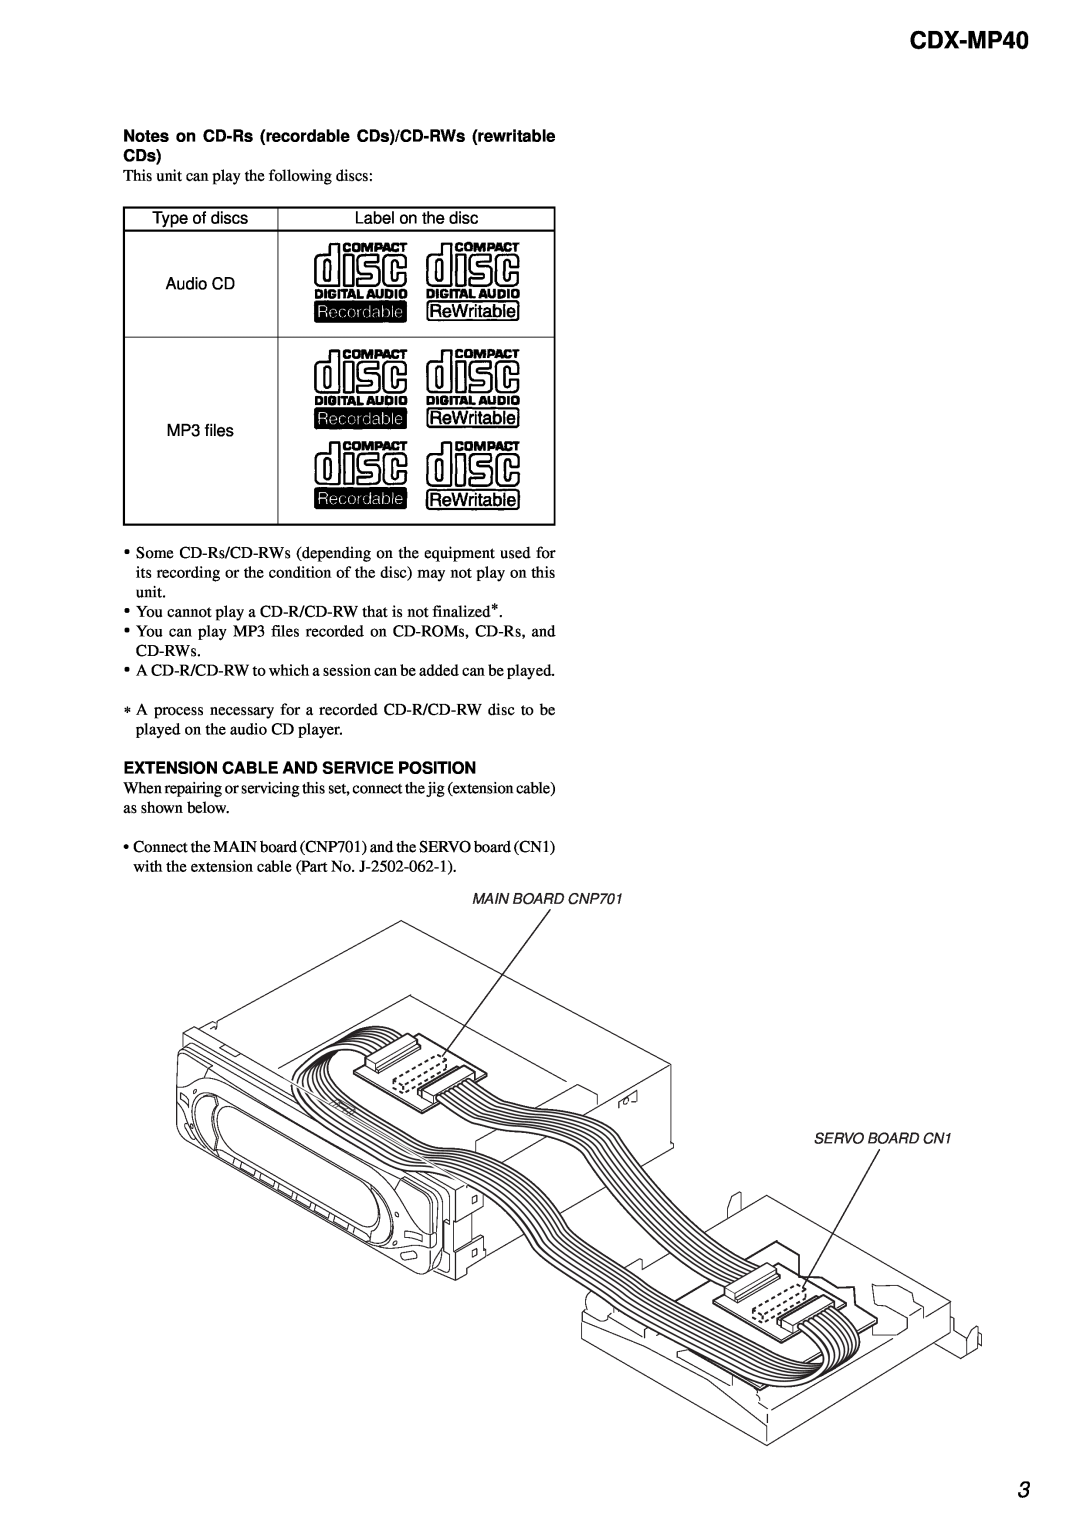 Sony CDX-MP40 service manual Notes on CD-Rsrecordable CDs/CD-RWsrewritable CDs, Extension Cable And Service Position 